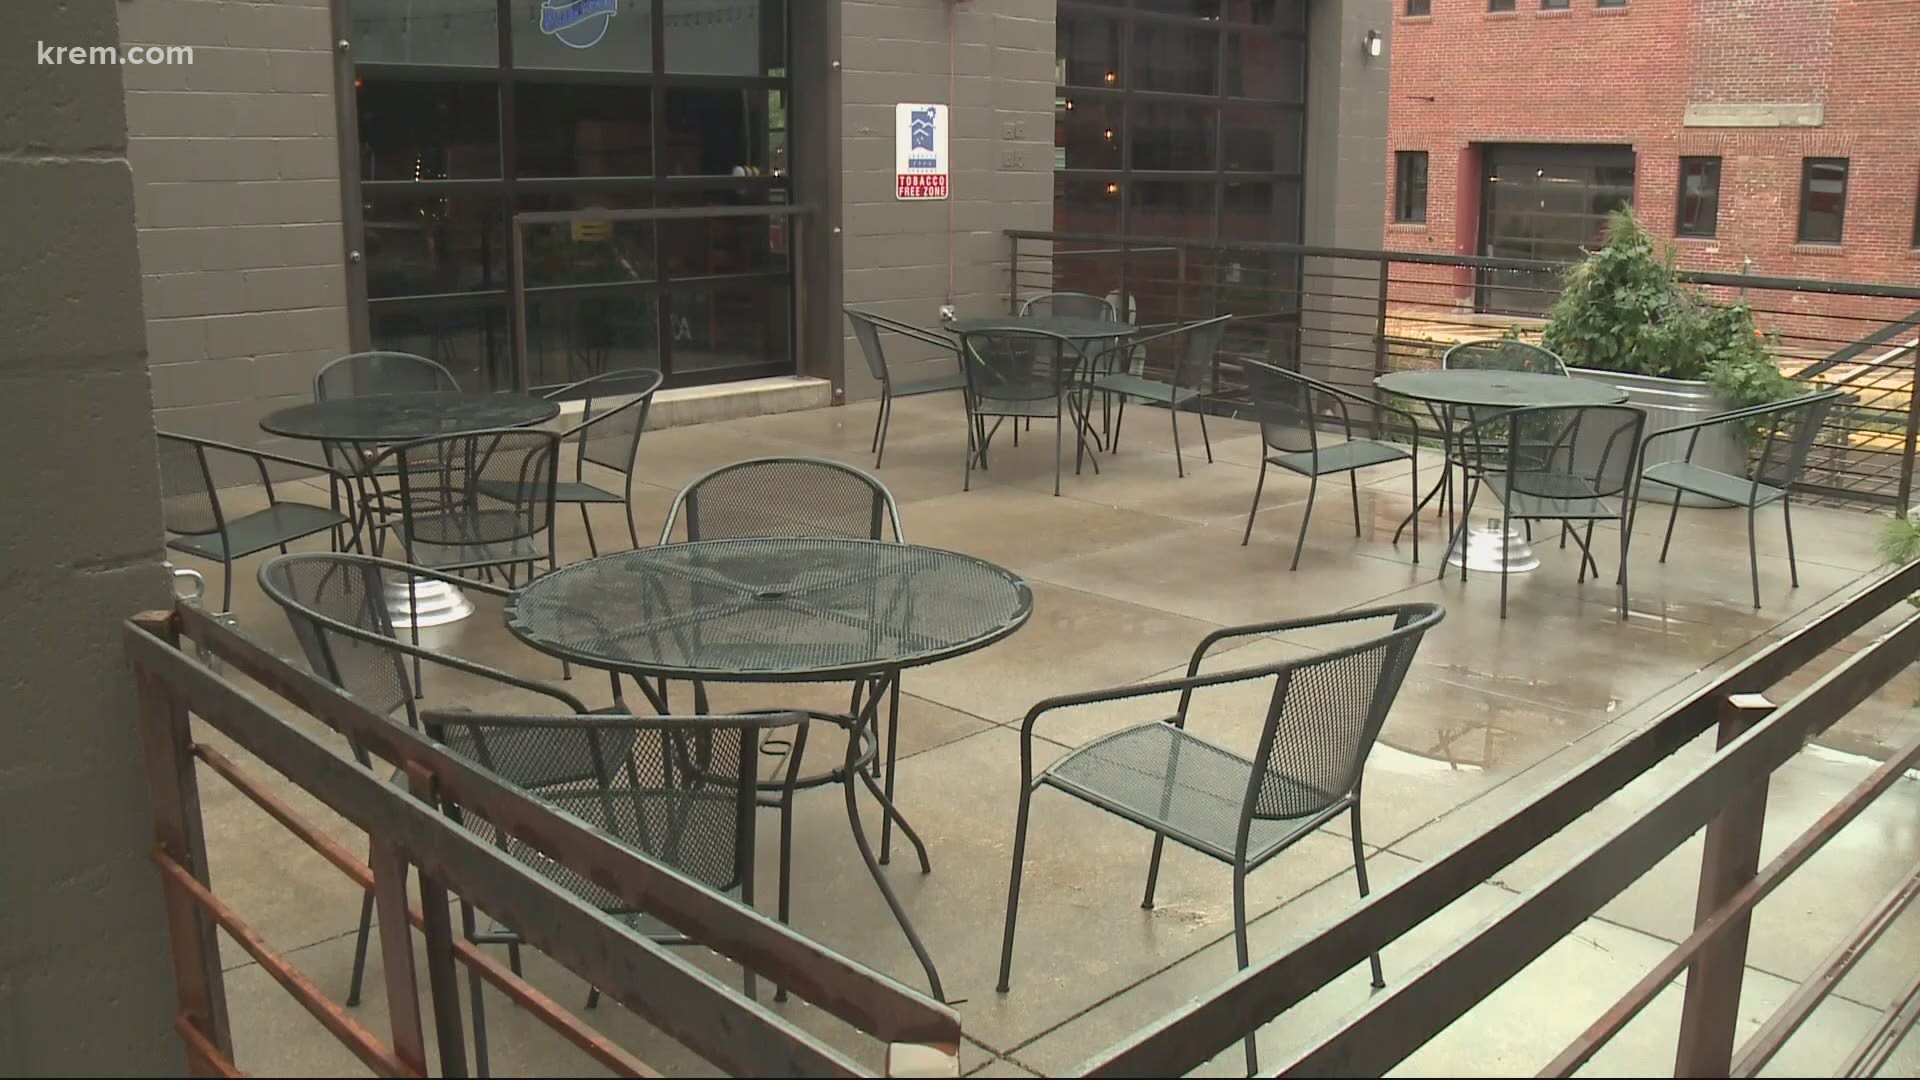 Most local restaurants are closing patio seating due to cold weather. Normally restaurants can survive that change, but seating has dramatically decreased indoors.